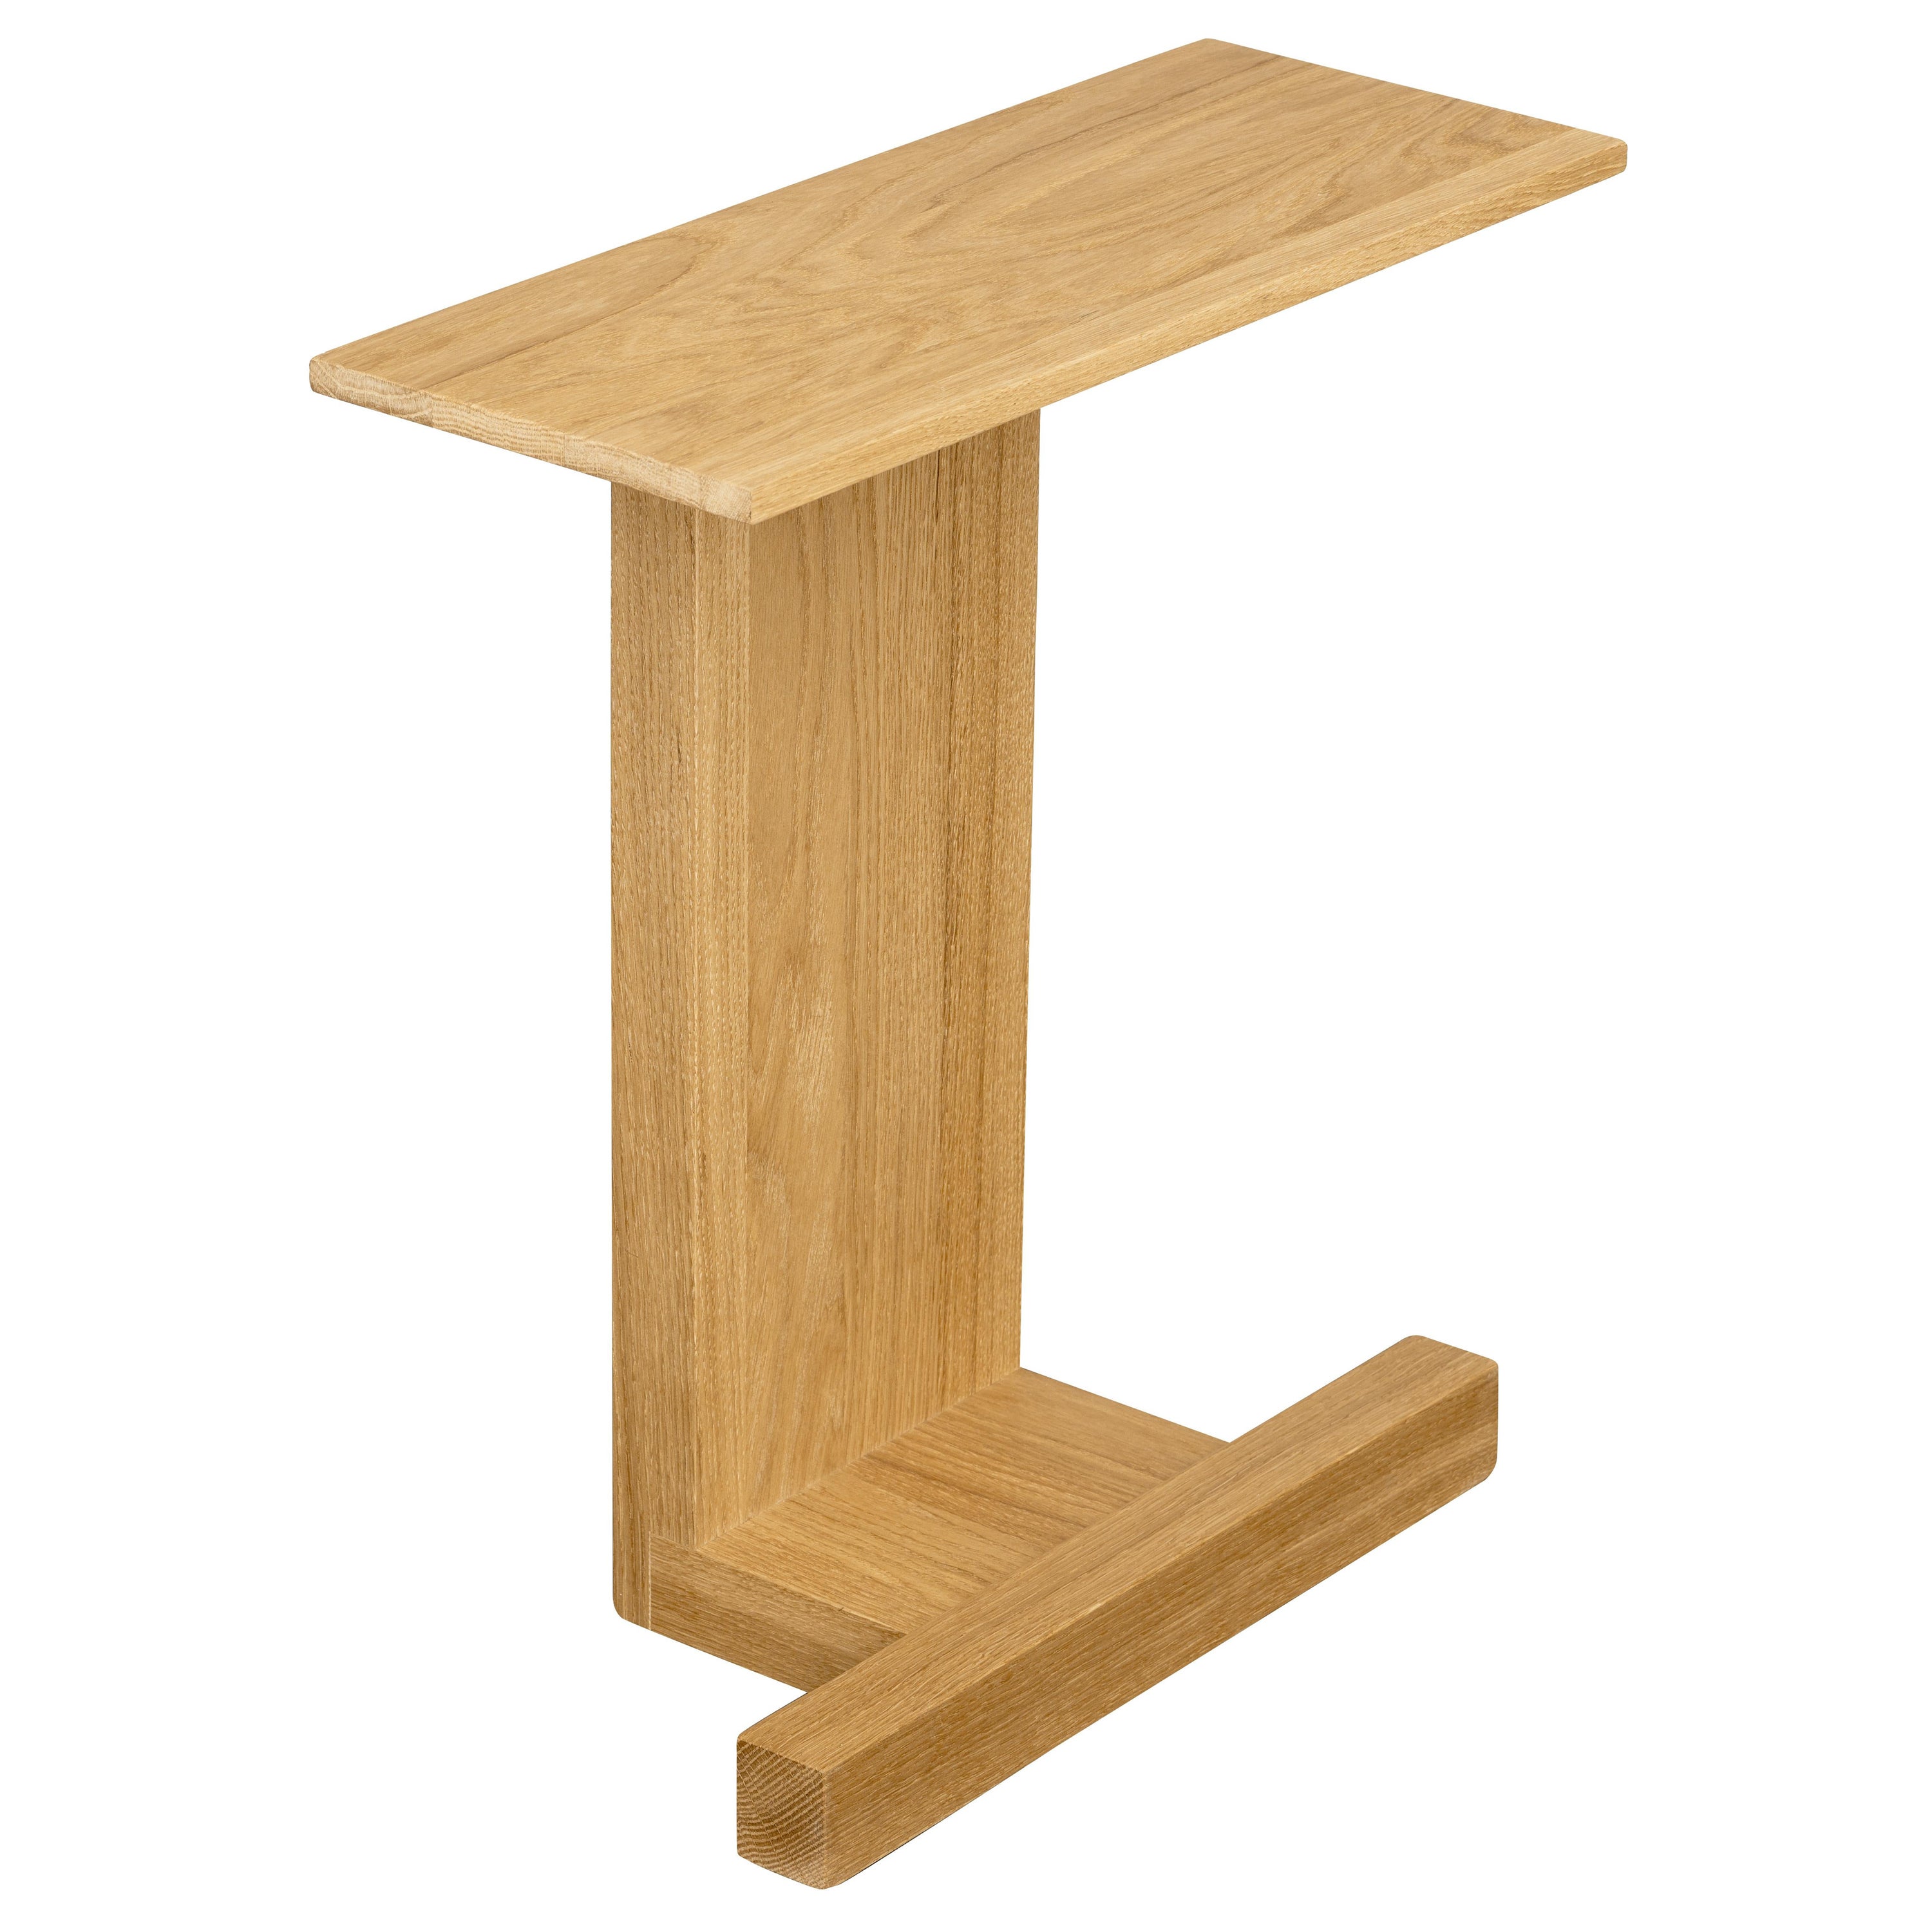 Supersolid Object 4, Wooden Bench by Fogia, Oak